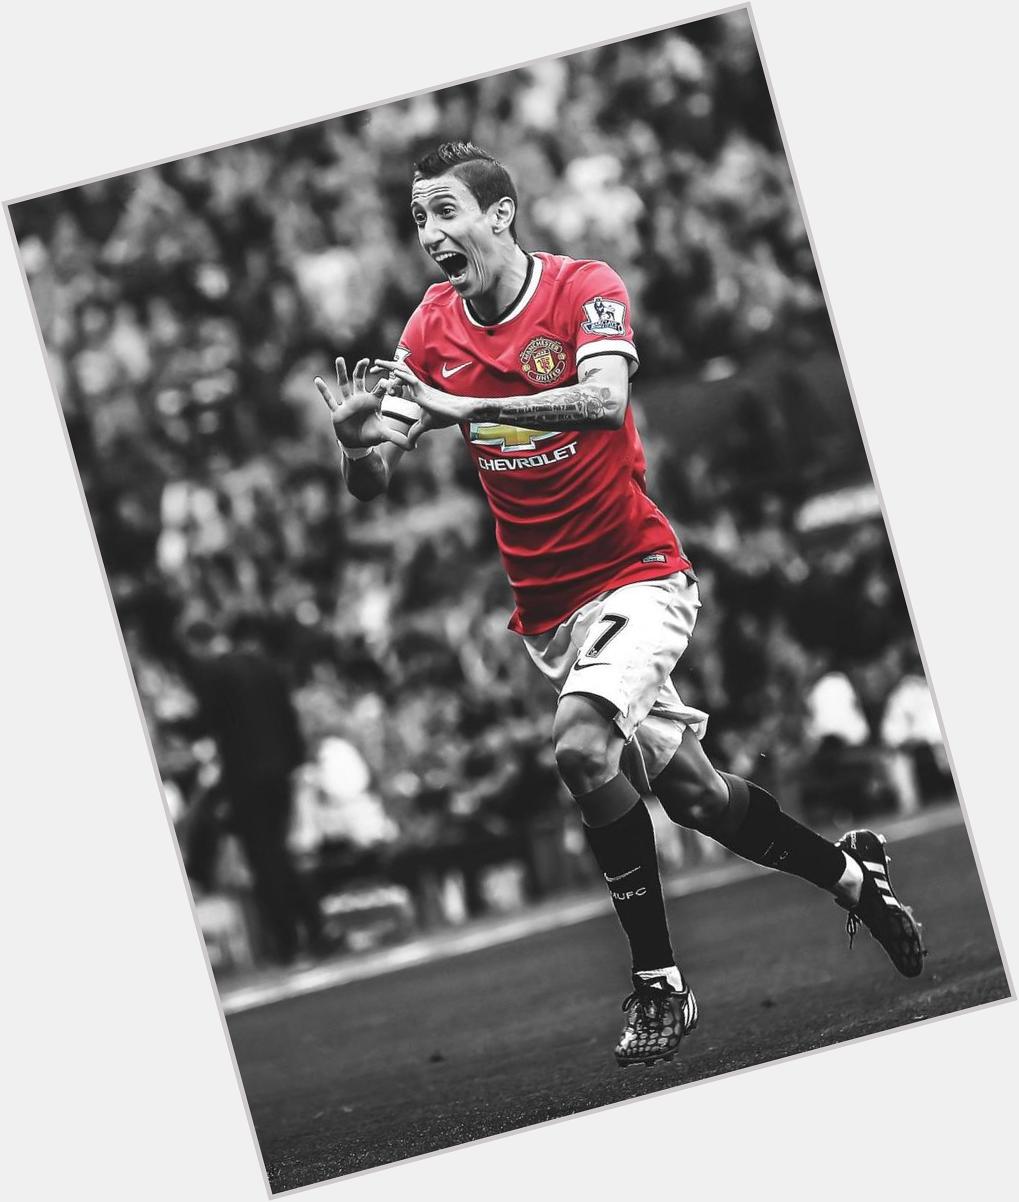 To our own Angel, happy birthday!!

Happy Birthday Angel Di Maria!!! 